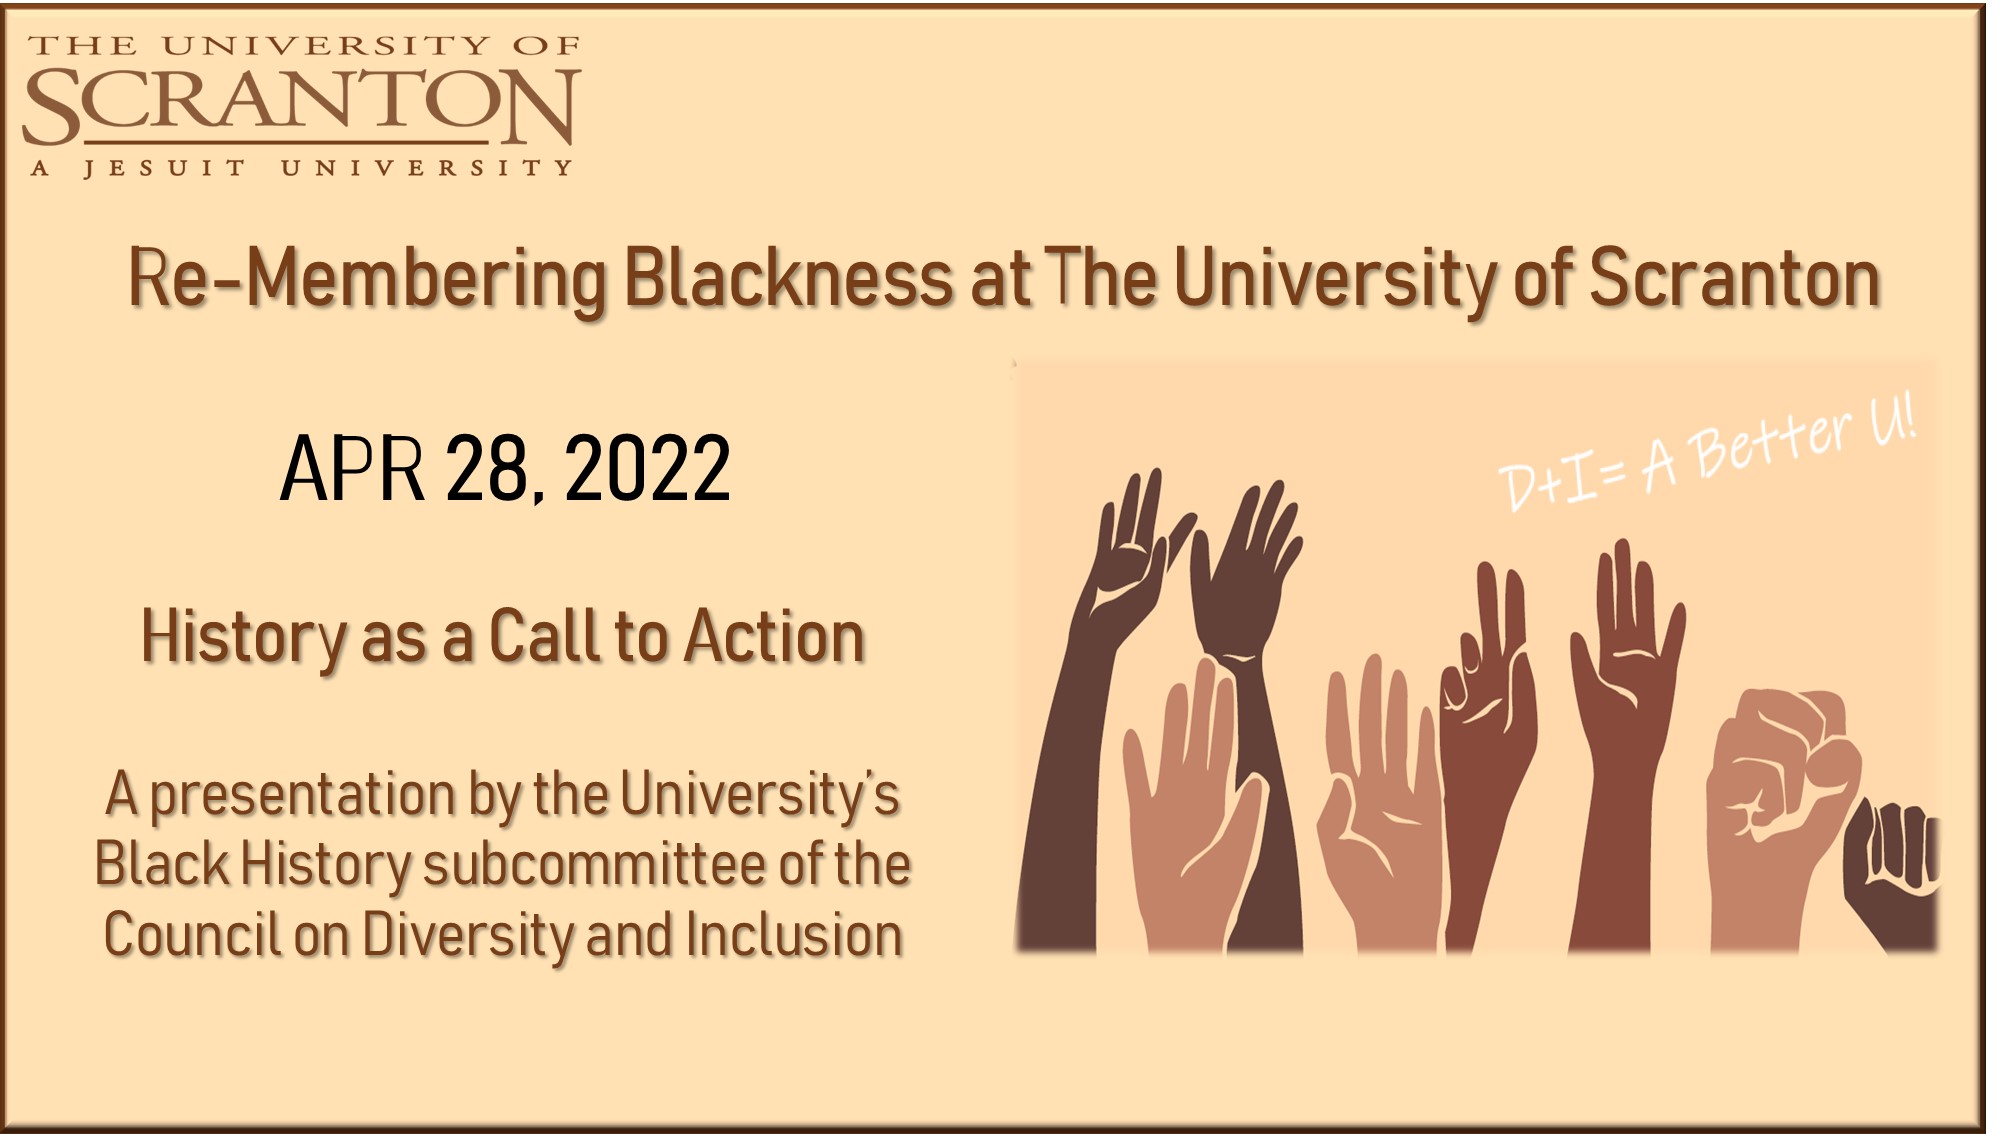 Re-Membering Blackness: History as a Call to Action image